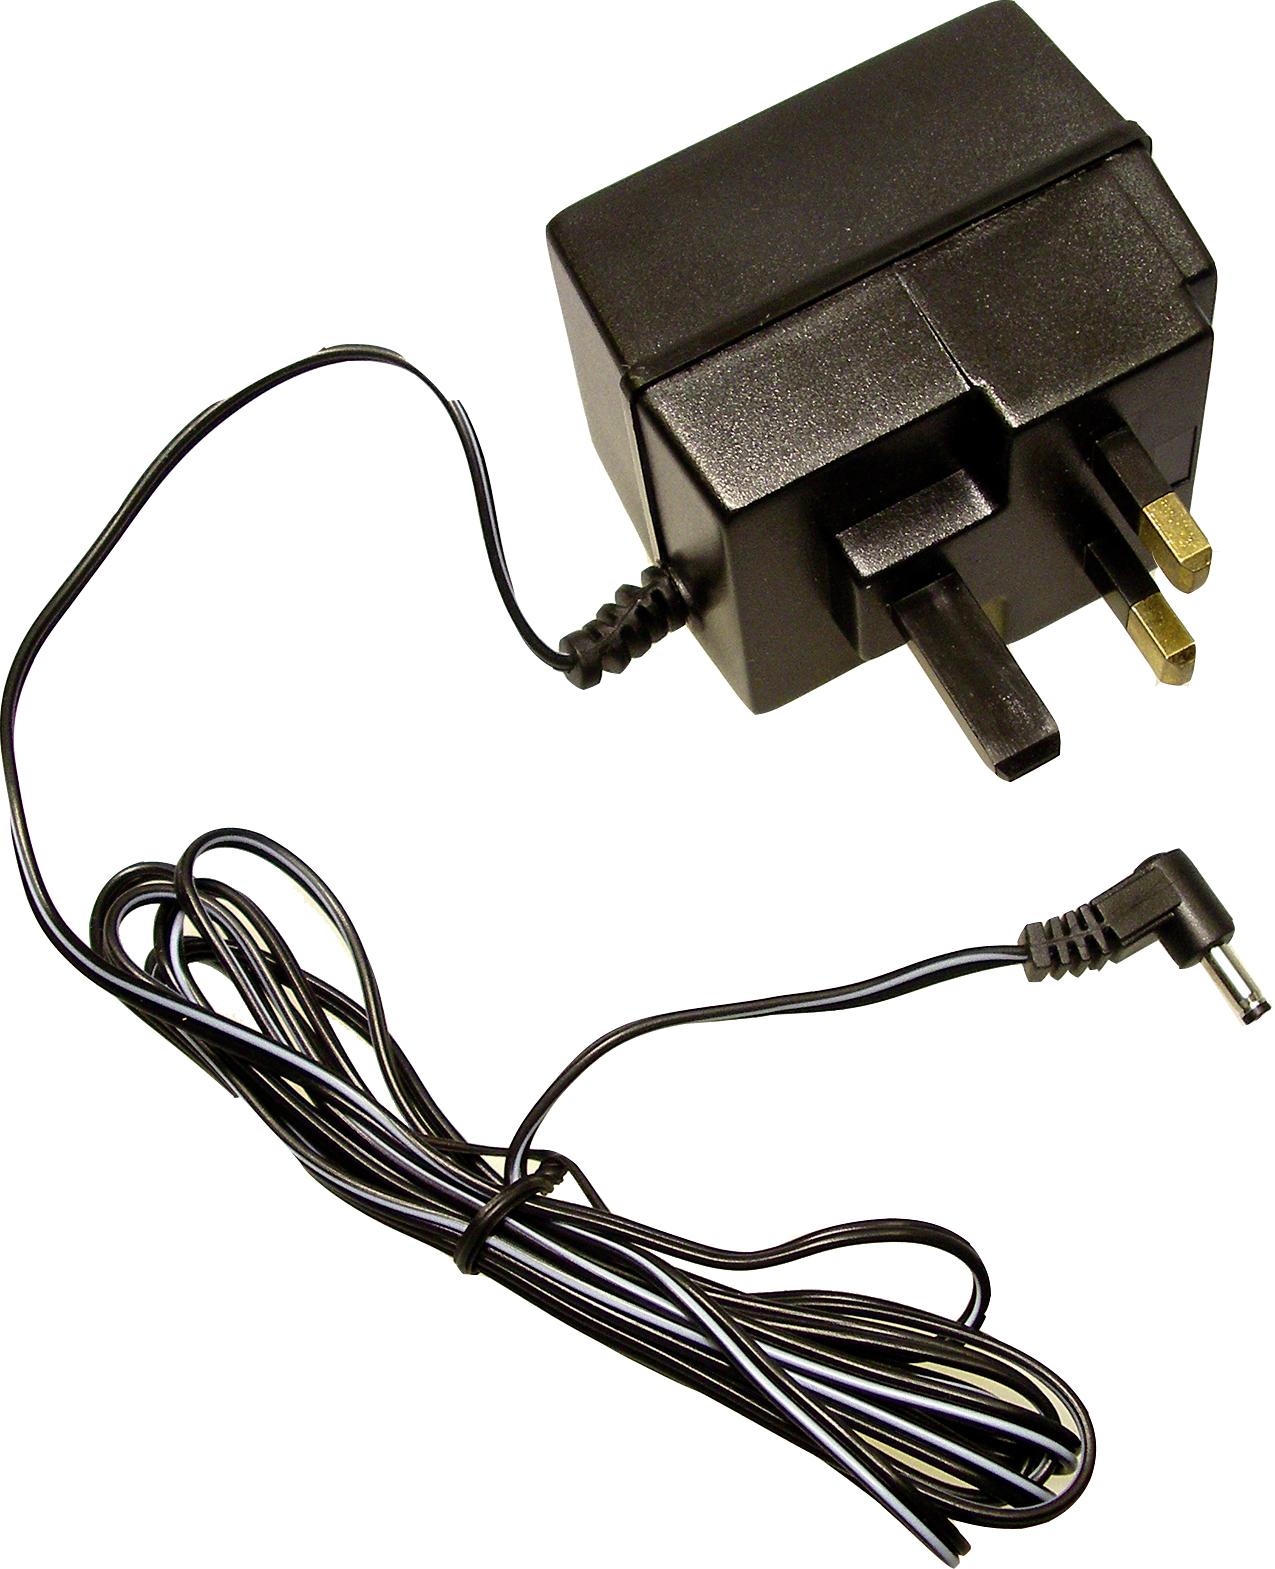 Replacement Charger for GRE PSR-255, PSR-275, and PSR-216